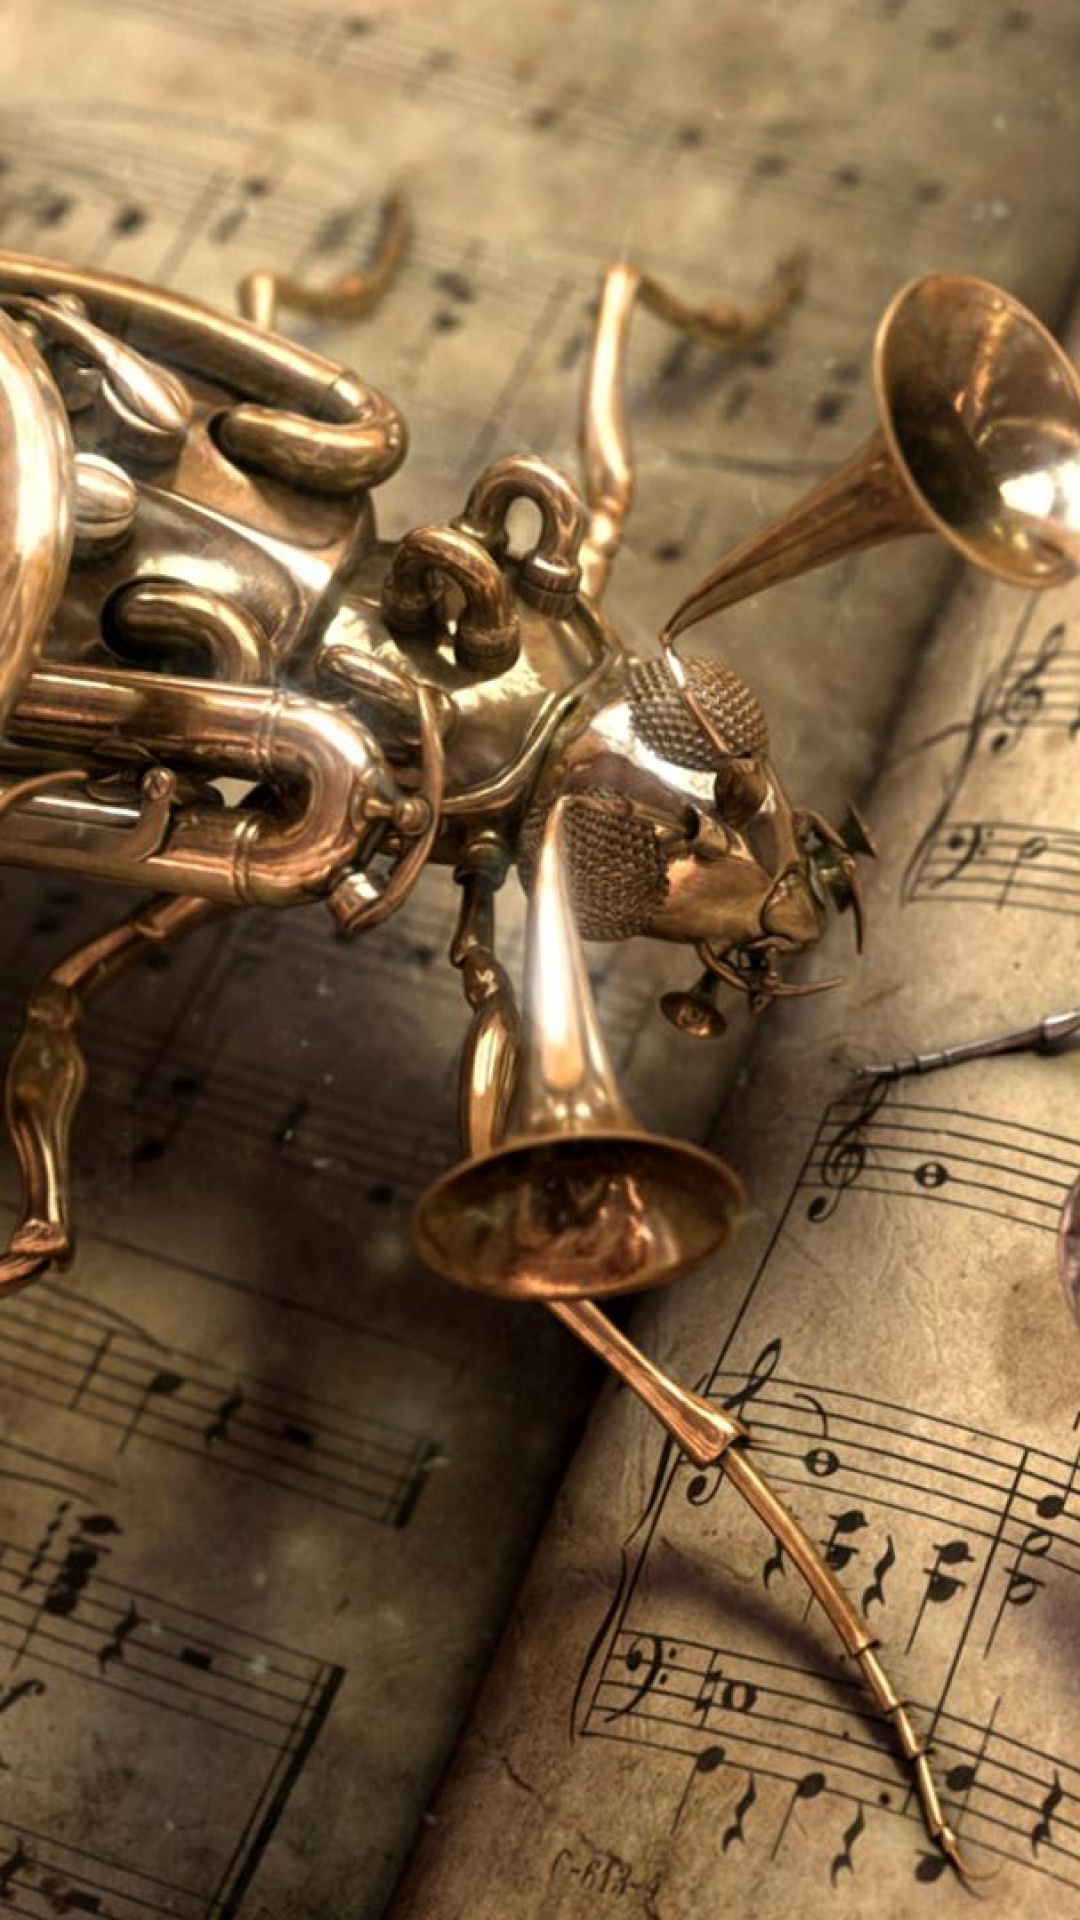 Musical Bug Steampunk Android Wallpaper download 1080x1920